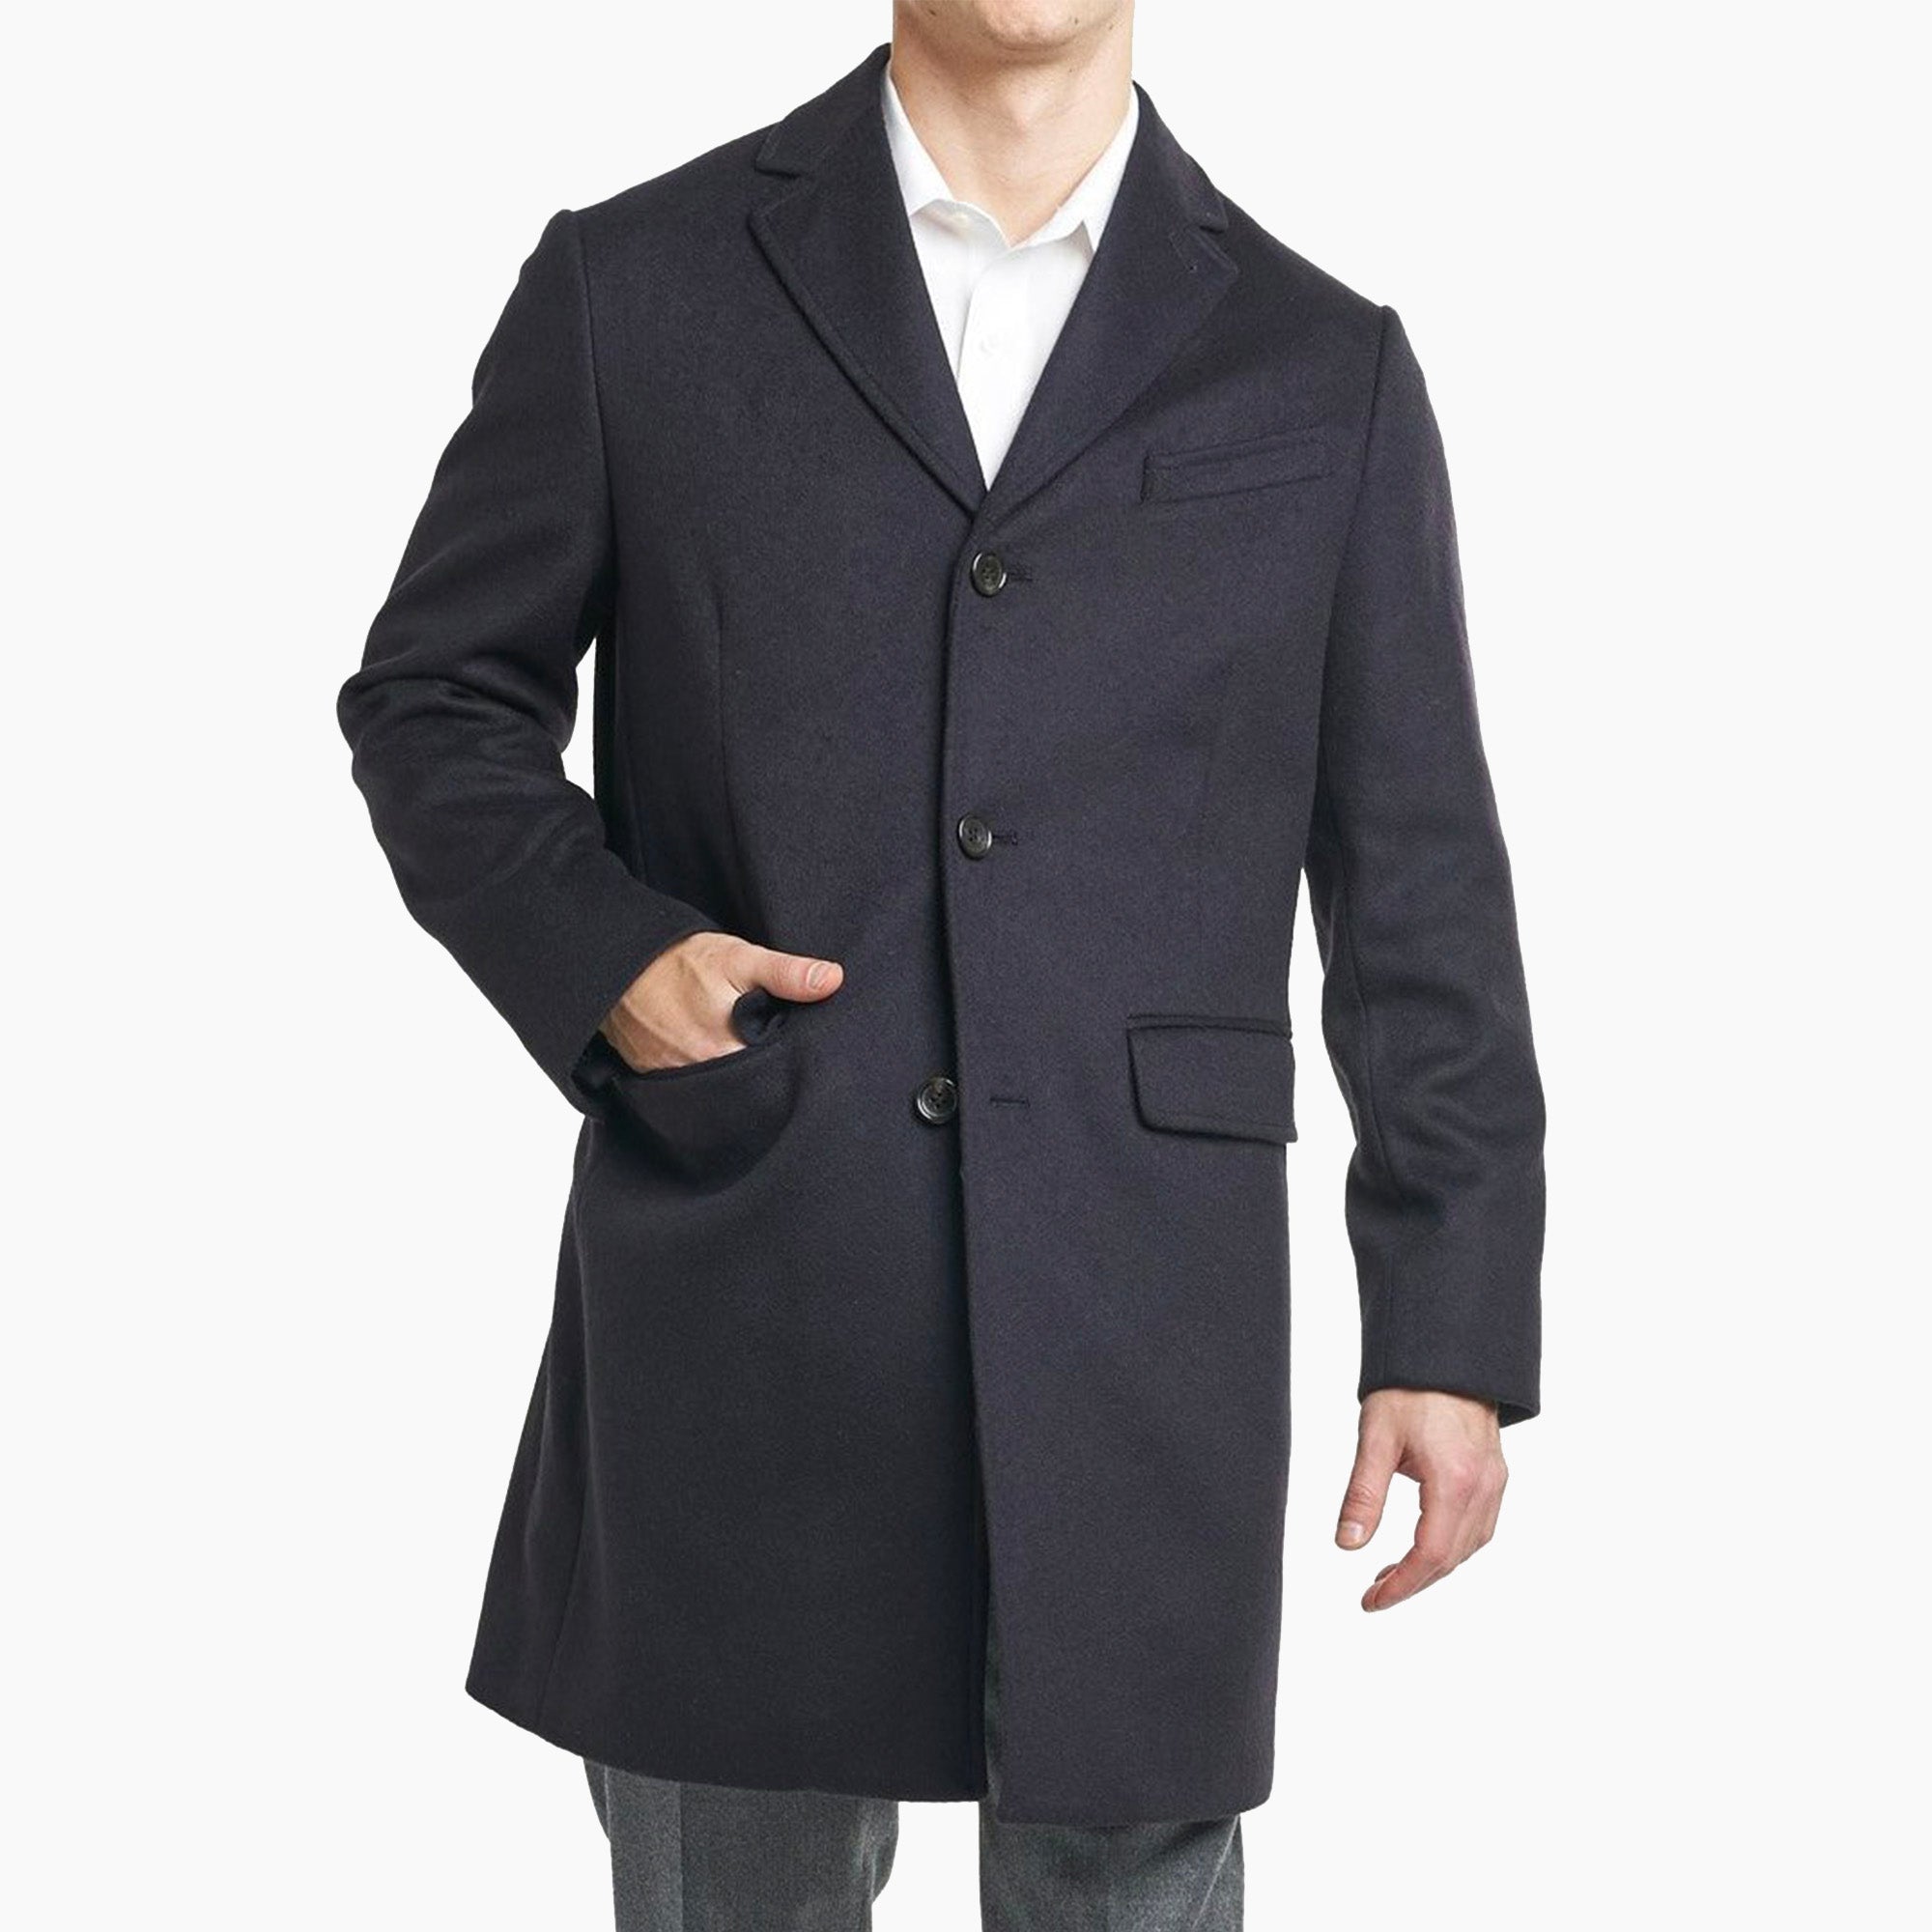 Fulton Wool Cashmere Topcoat, Navy